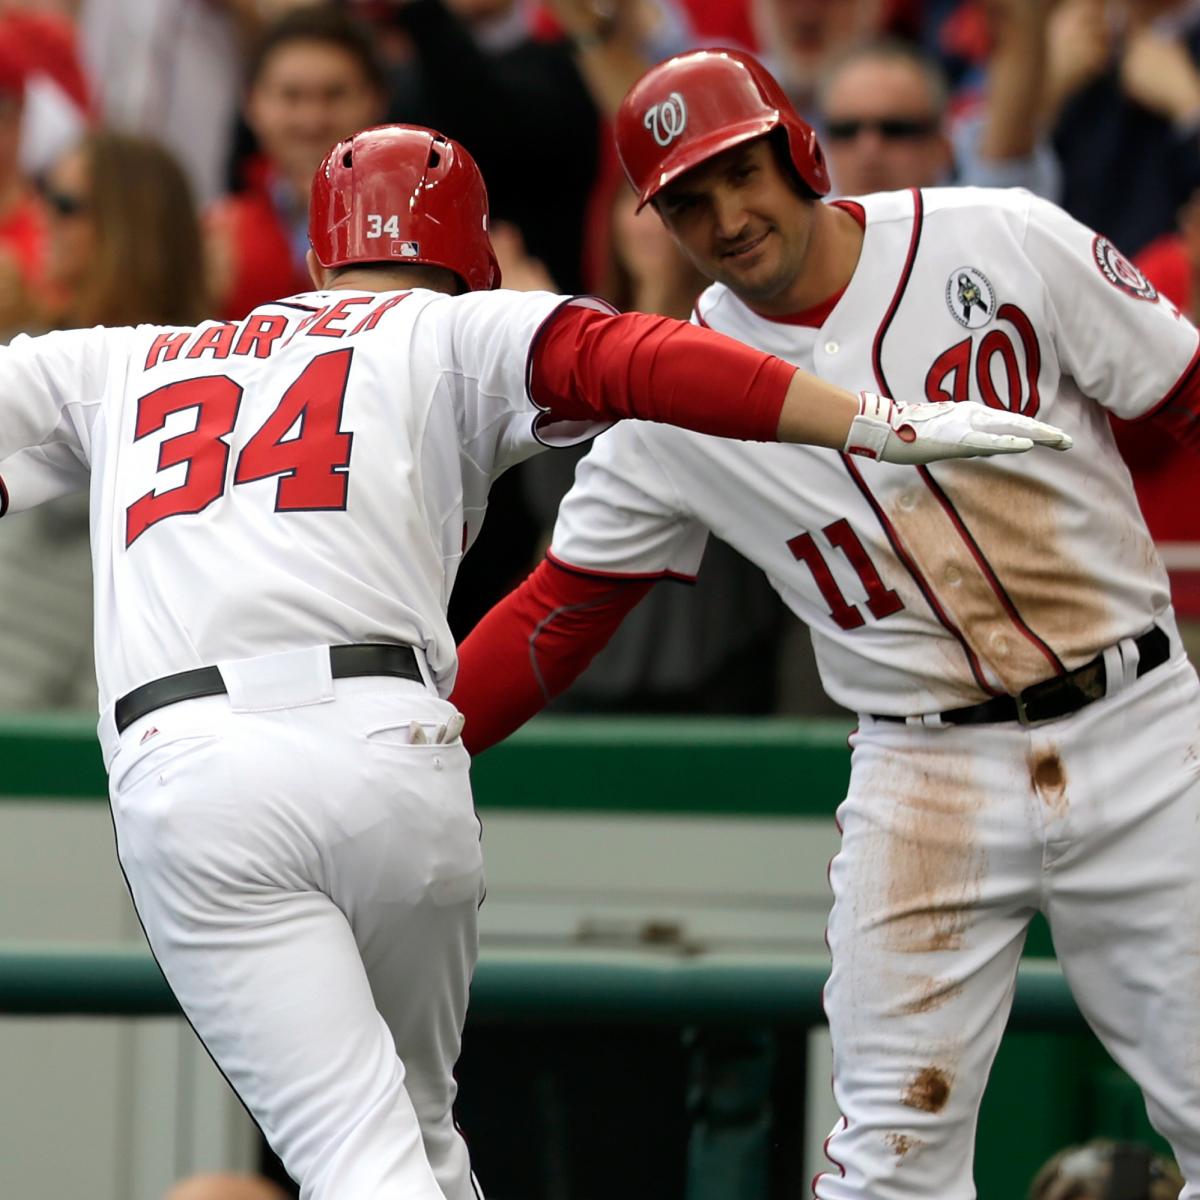 5 Washington Nationals Players' Hottest Starts to the Season That Will